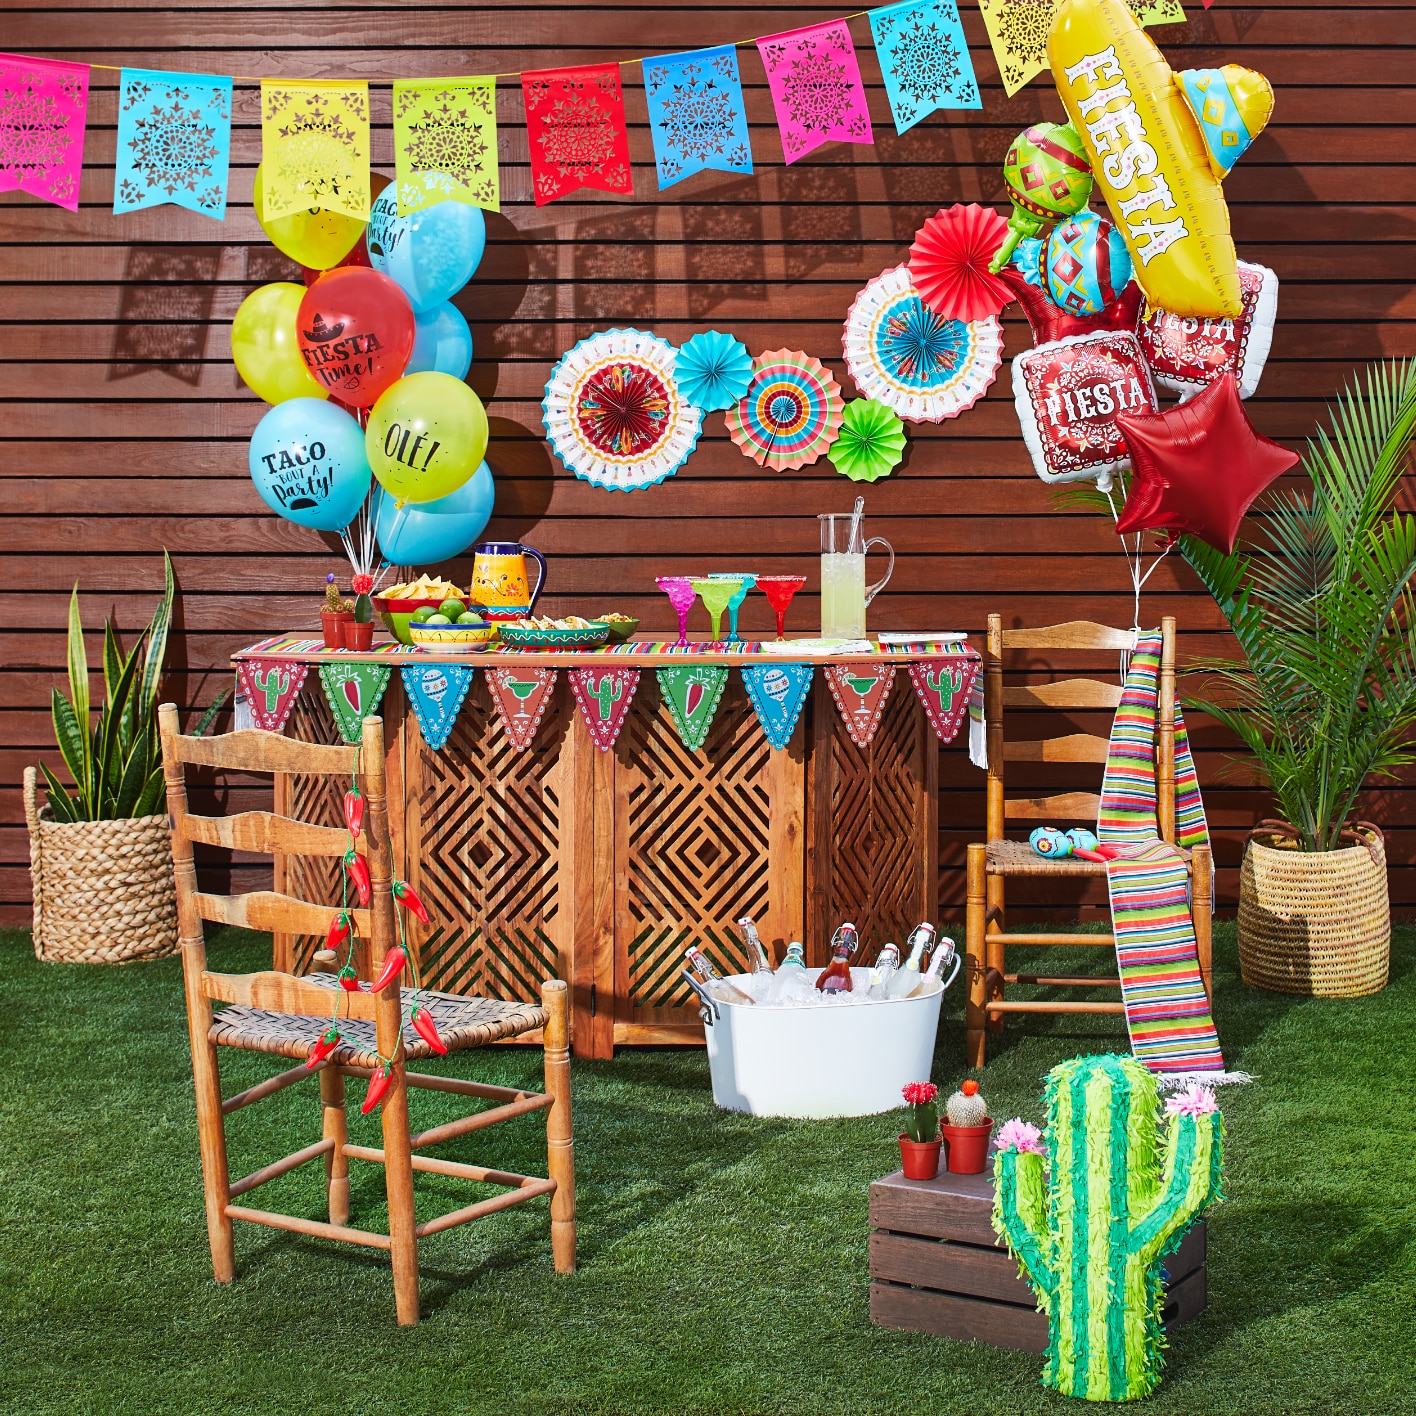 Create a celebration to remember with party décor to match any theme or occasion.